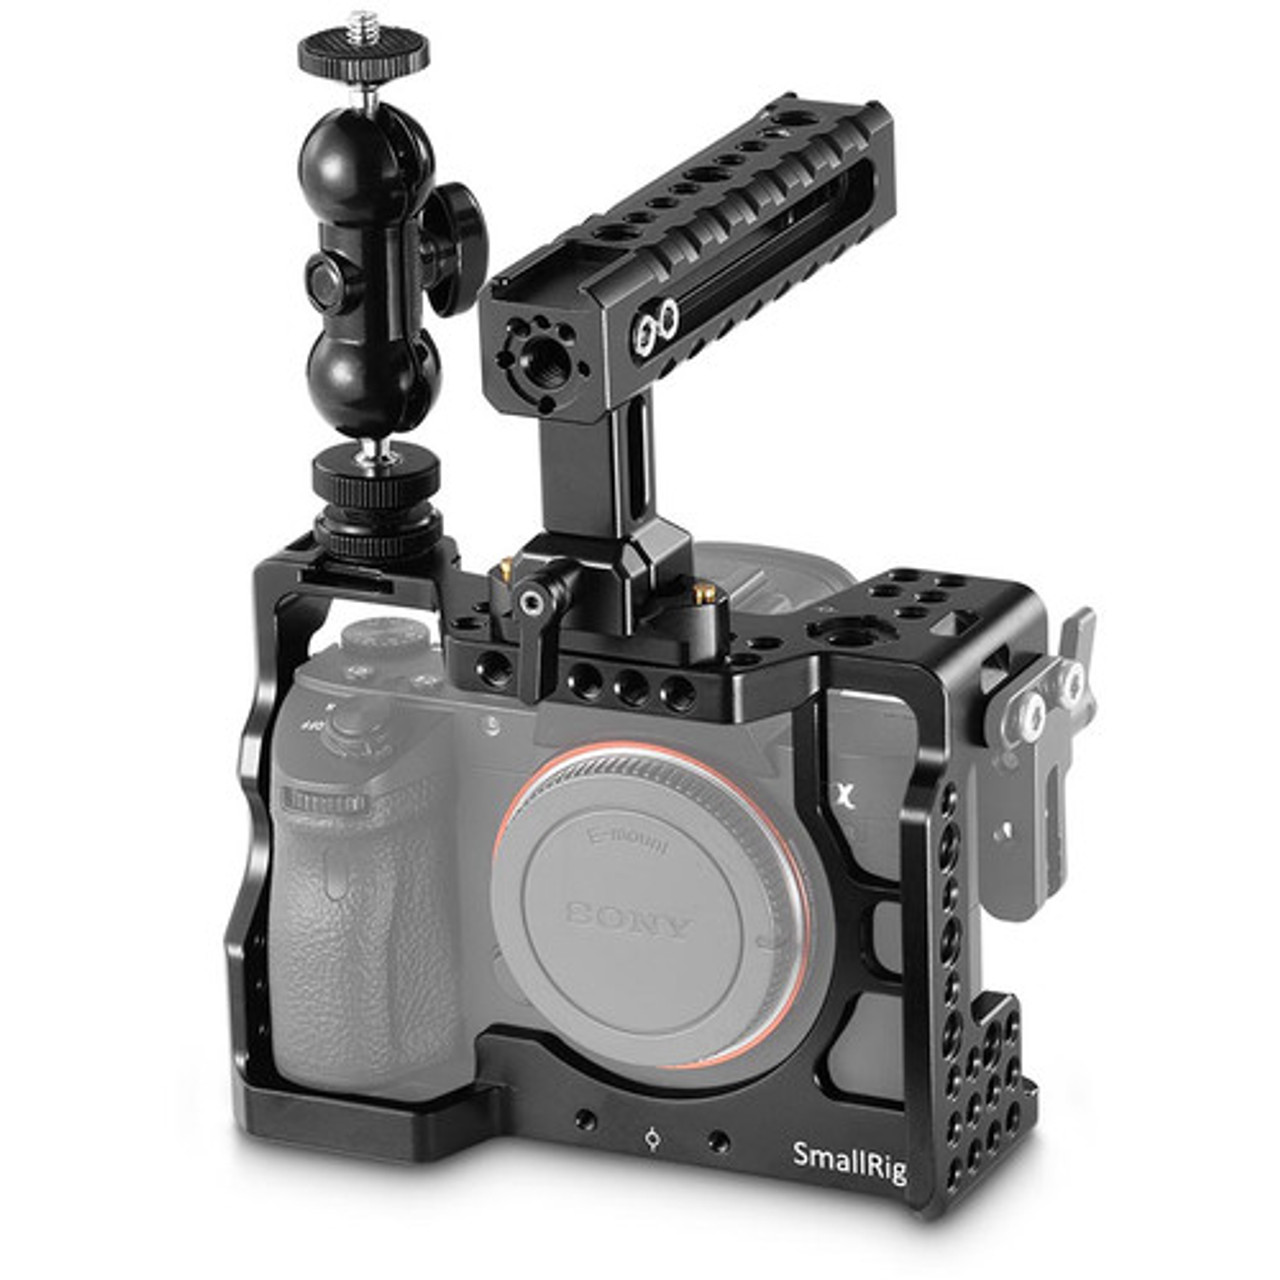 enkelt gang Forberedende navn vaccination SmallRig Camera Cage Kit for Sony a7 III Series Cameras 3624 at Acephoto.net